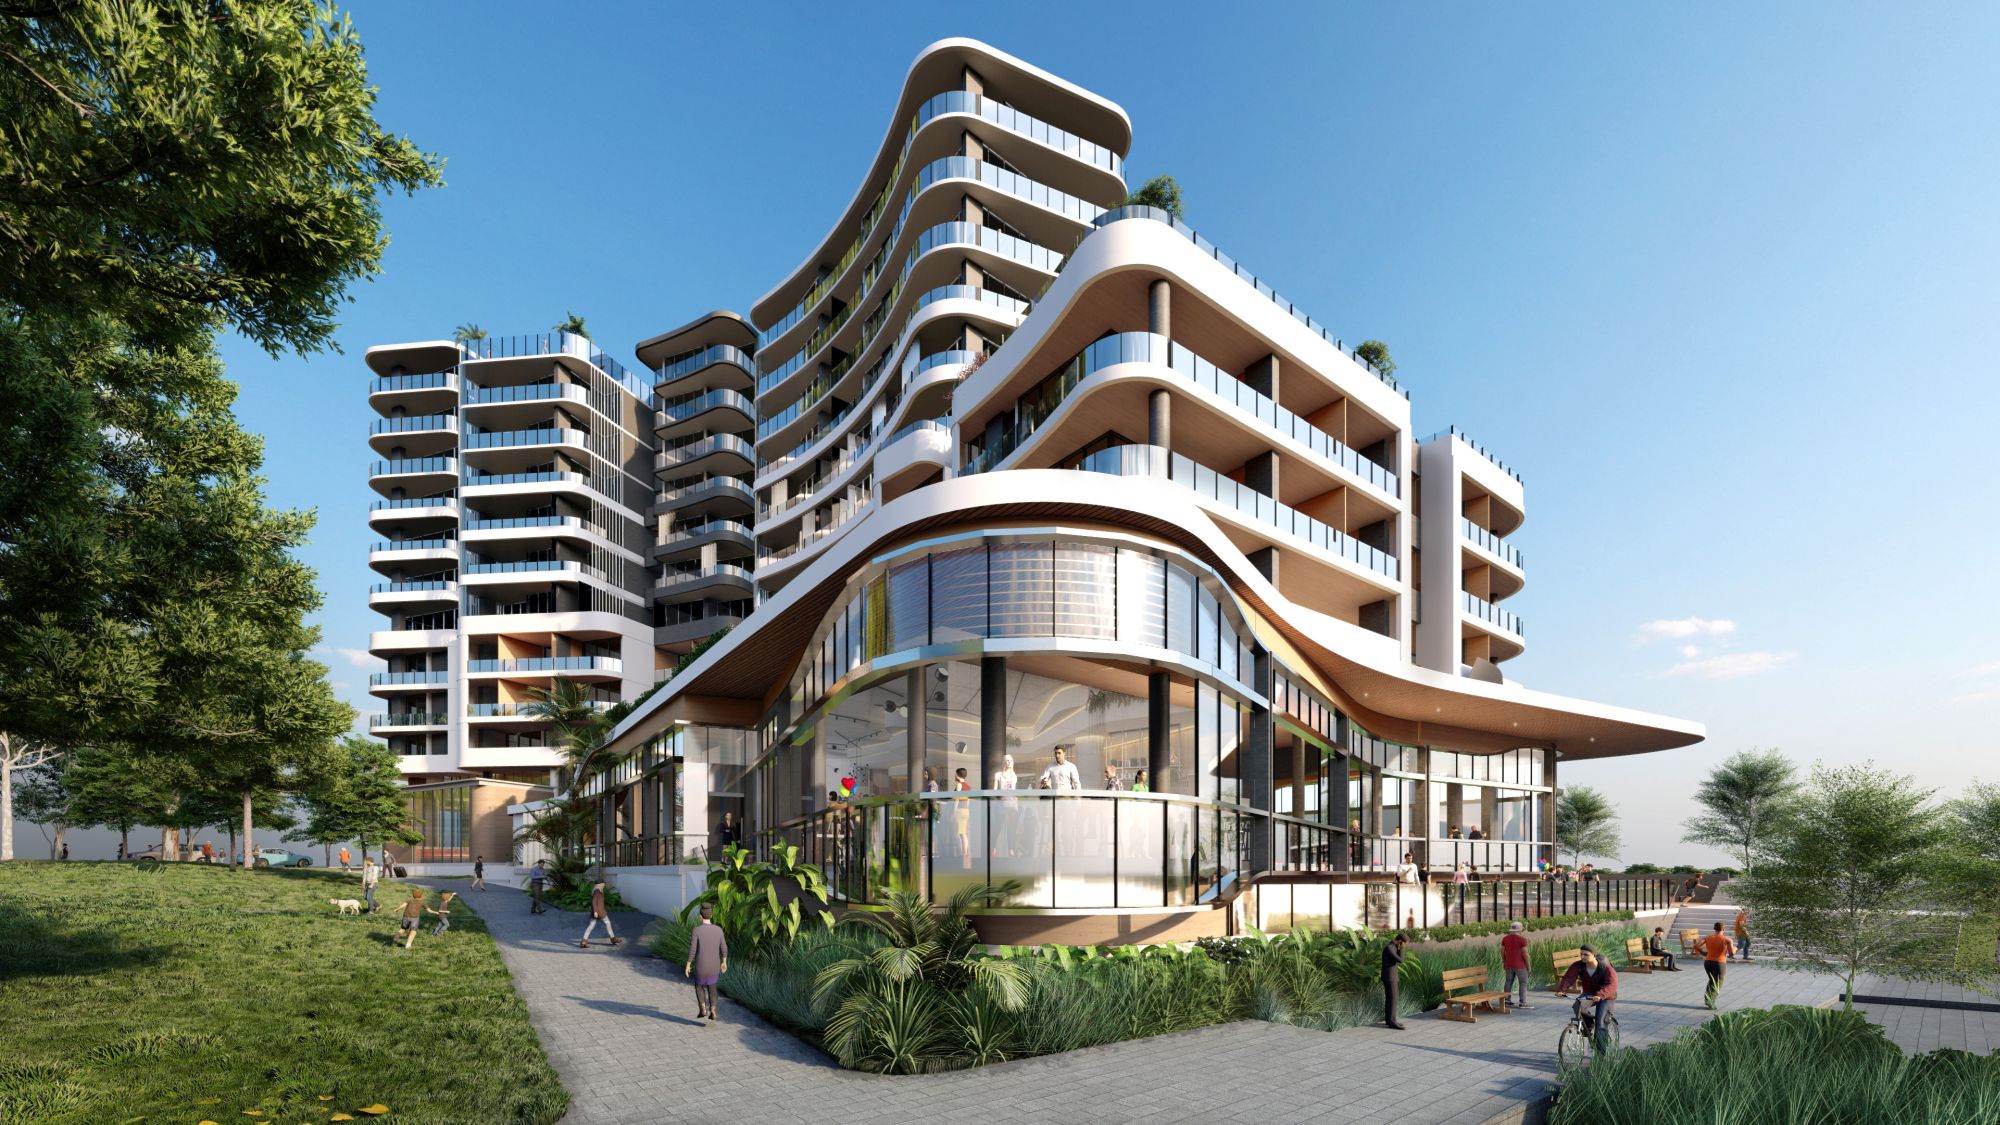 The Waterfront, Shell Cove Hotel by Oscars Hotel, Frasers Property Australia, Shellharbour City Council